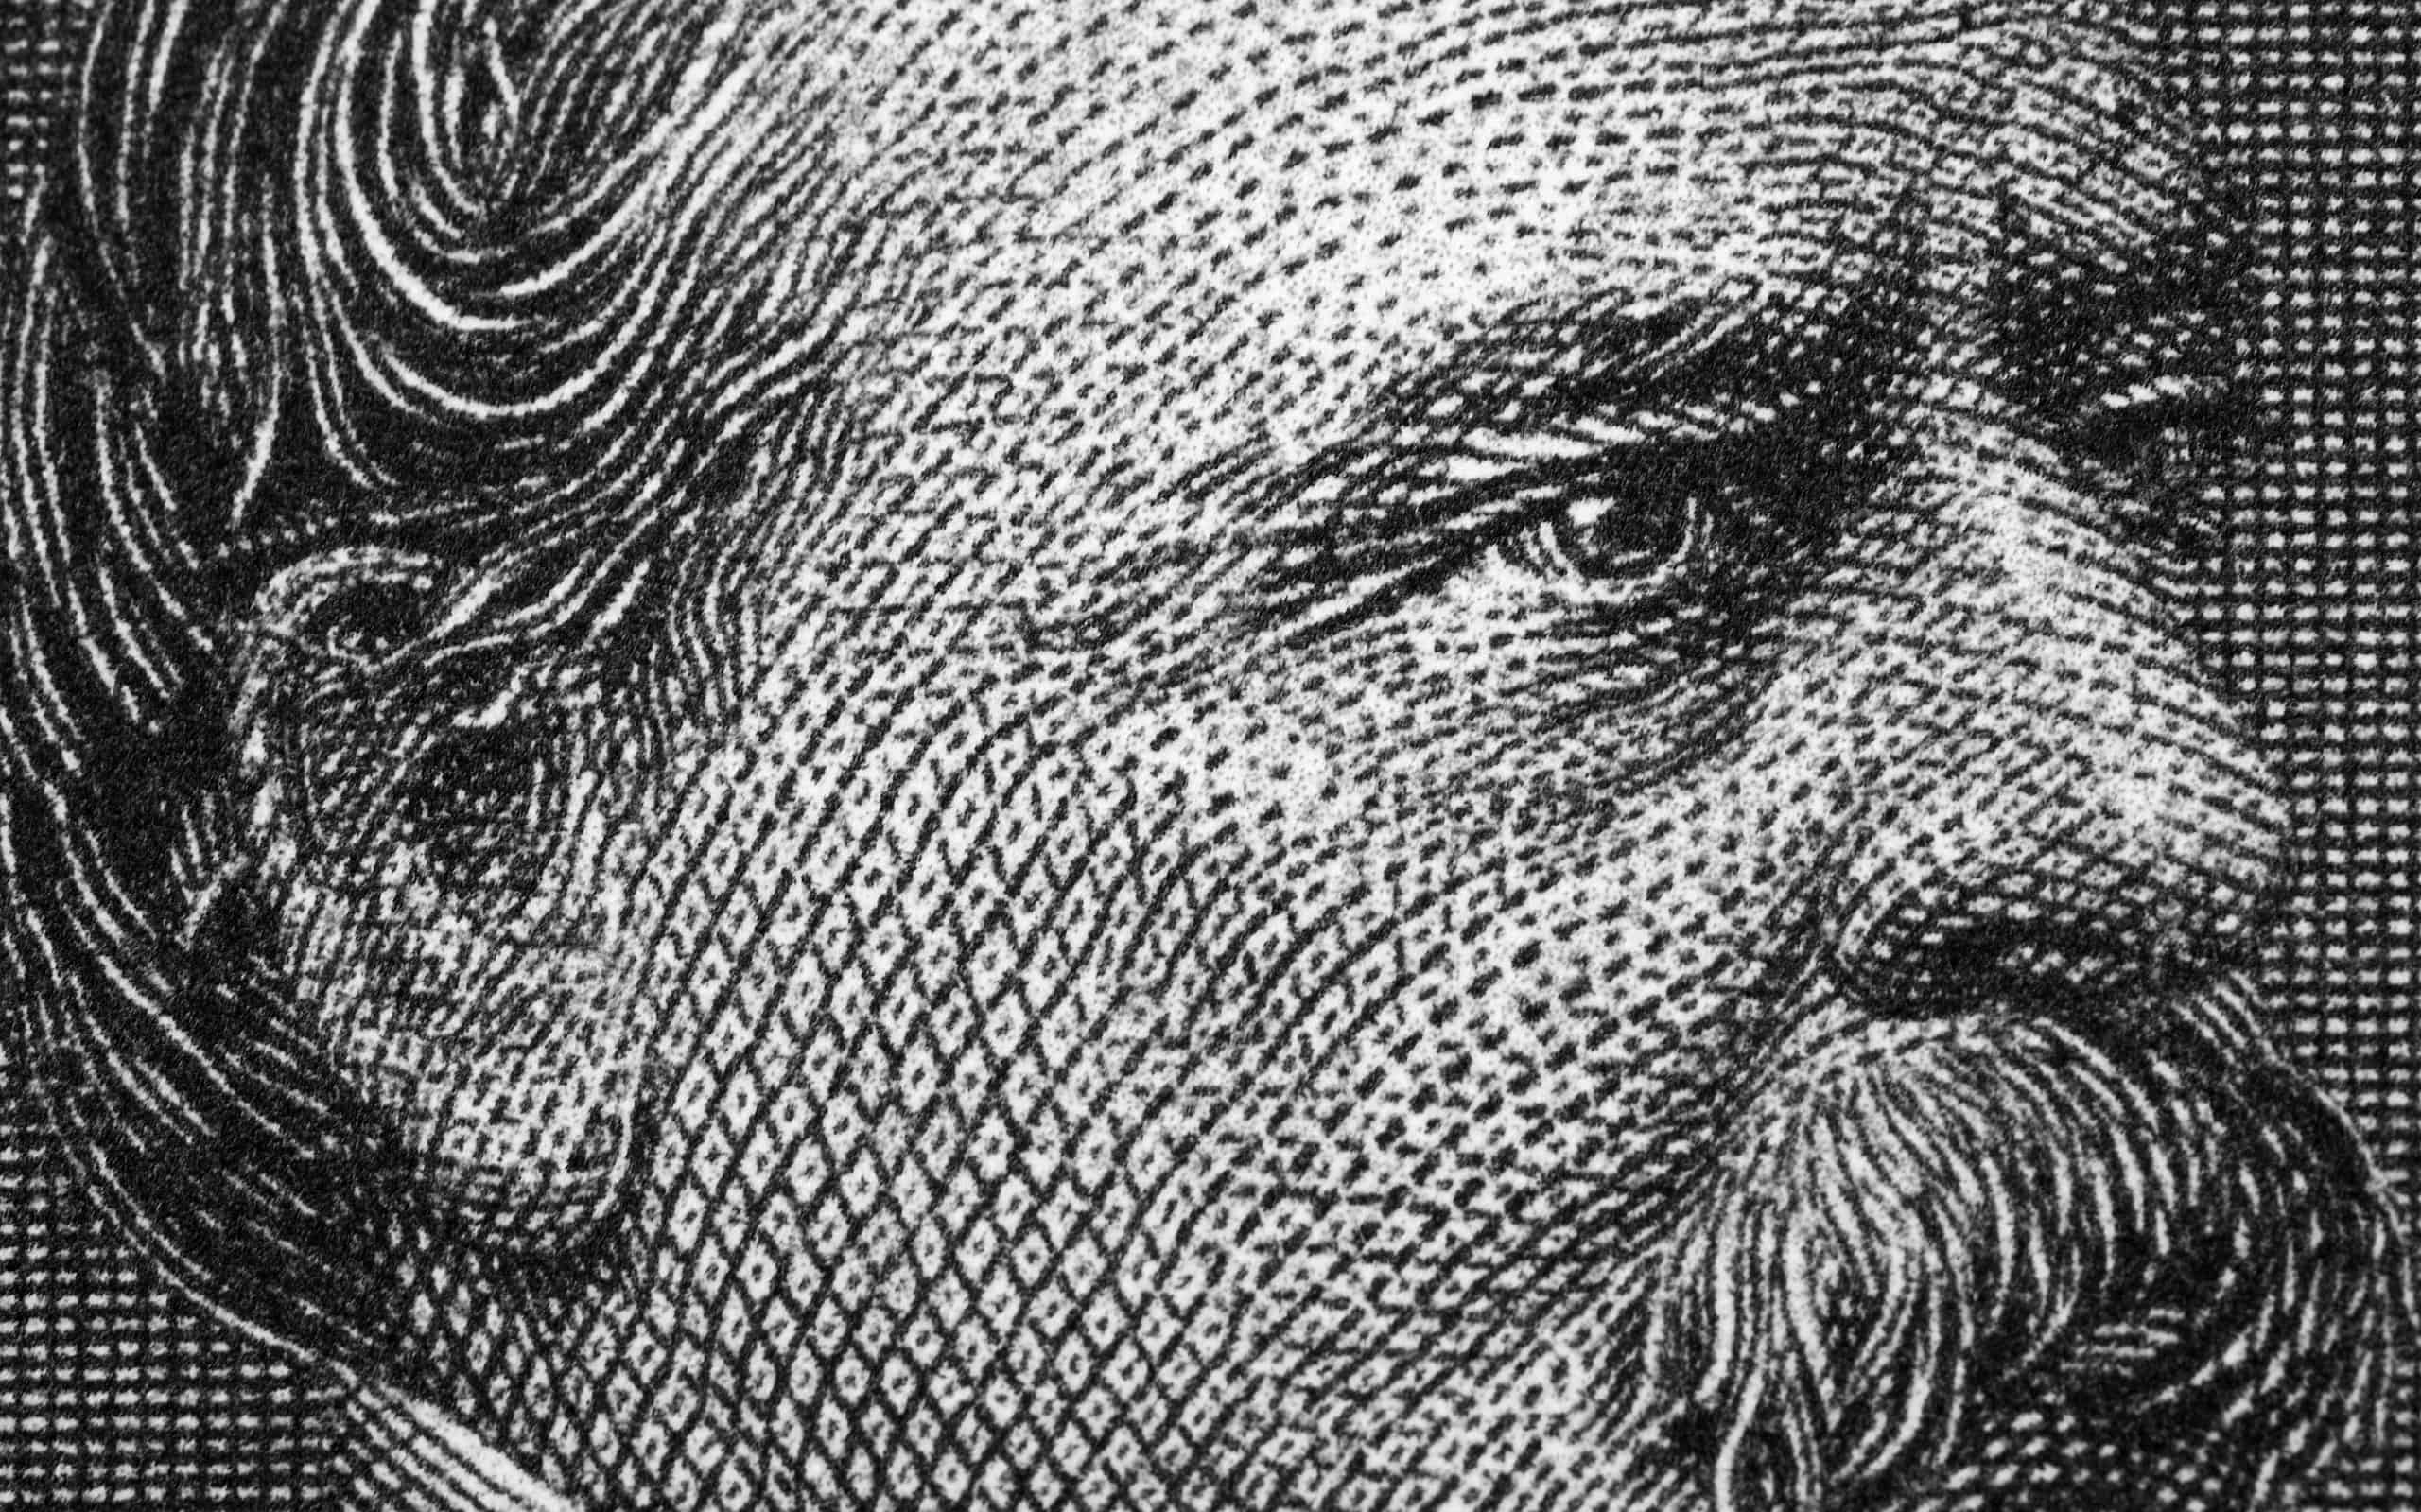 Grover Cleveland a close-up portrait from old Dollars